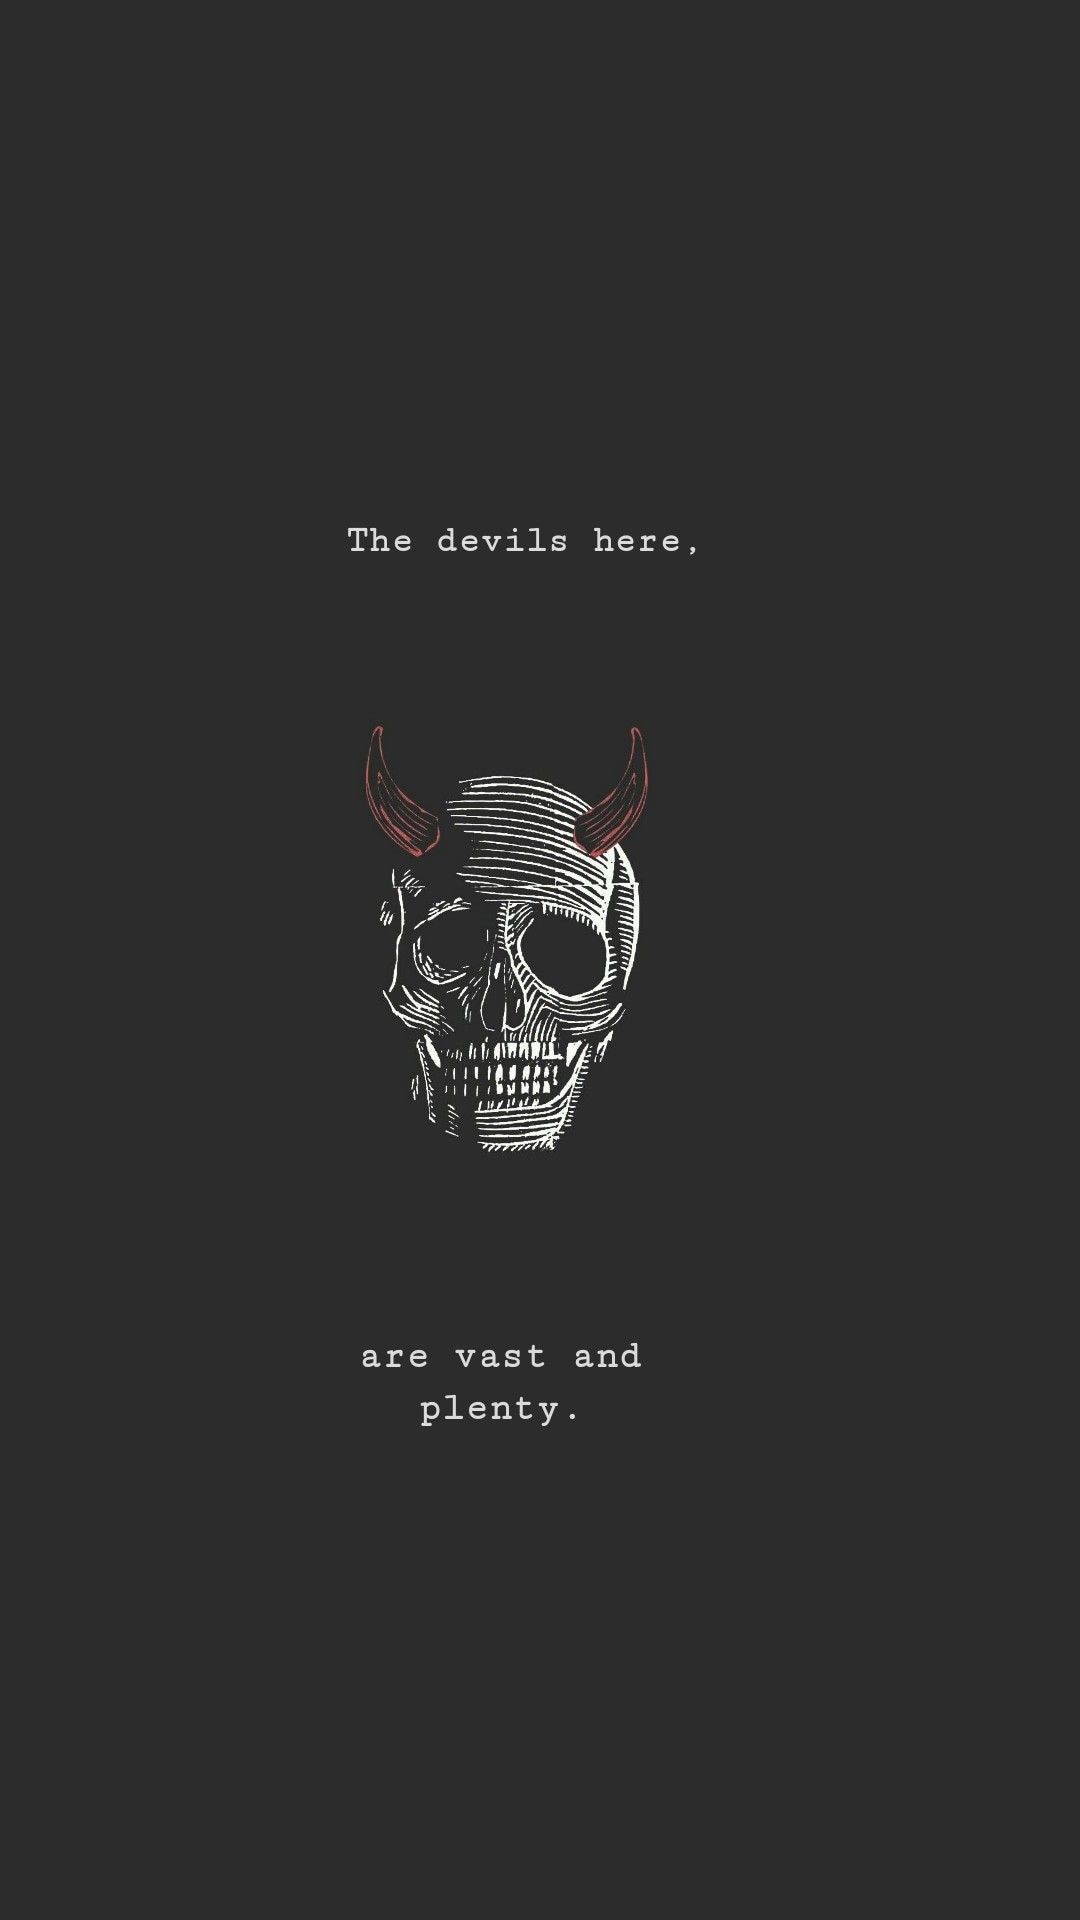 The devils here are vast and plenty #iphonewallpaper #phonewallpaper #androidwallpaper #taa. Emo wallpaper, Dark wallpaper, Aesthetic wallpaper